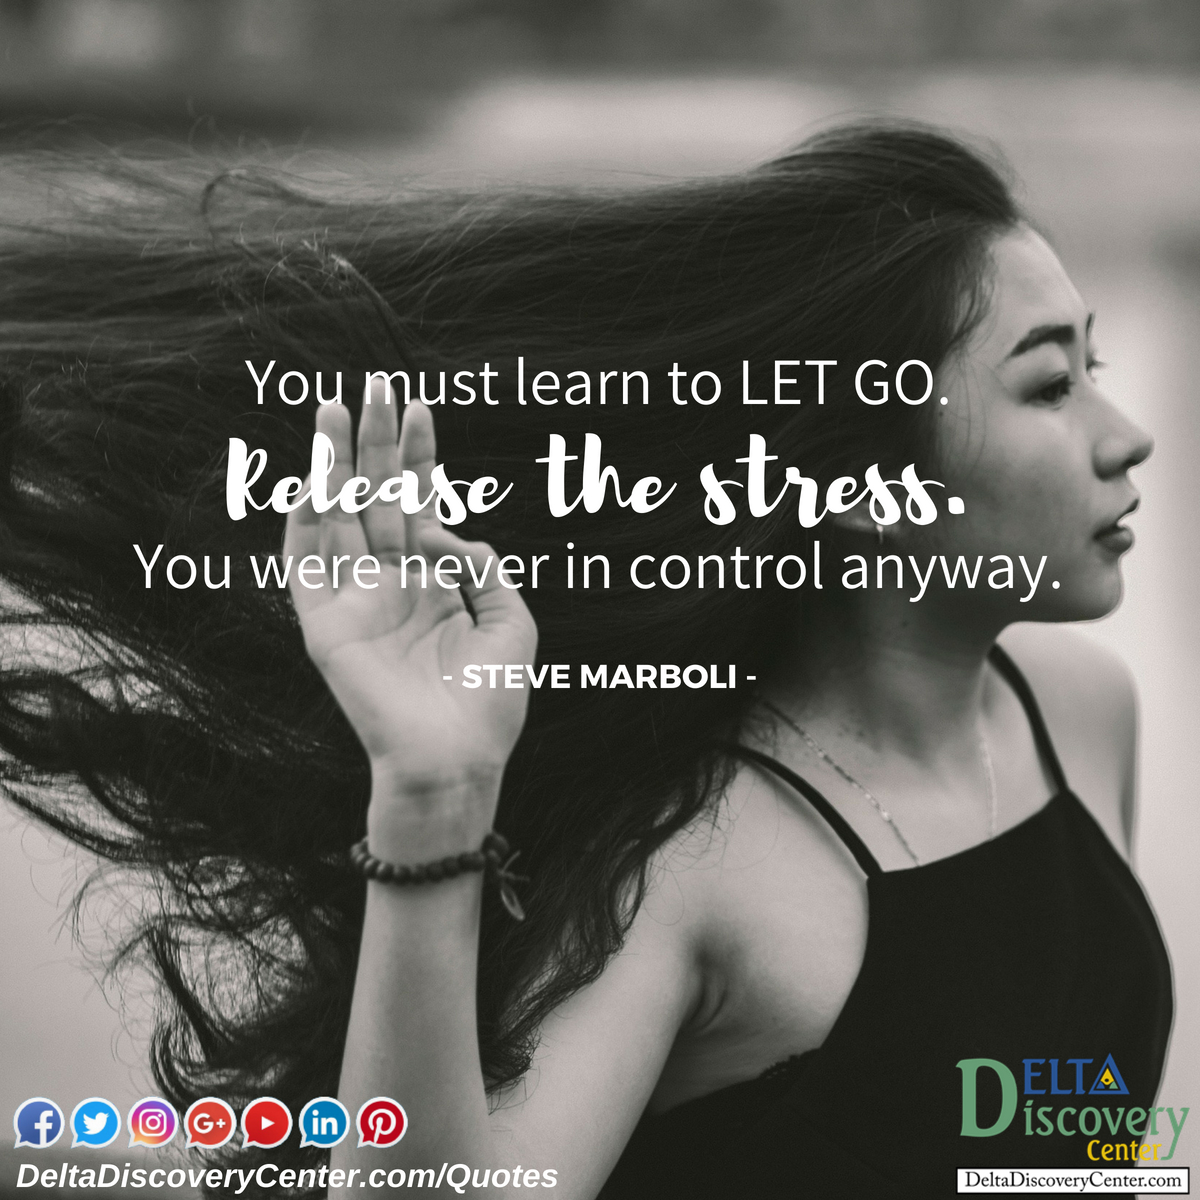 You must learn to let go. Release the stress. You were never in control anyway.

#SteveMarboli #foodforthought #healing